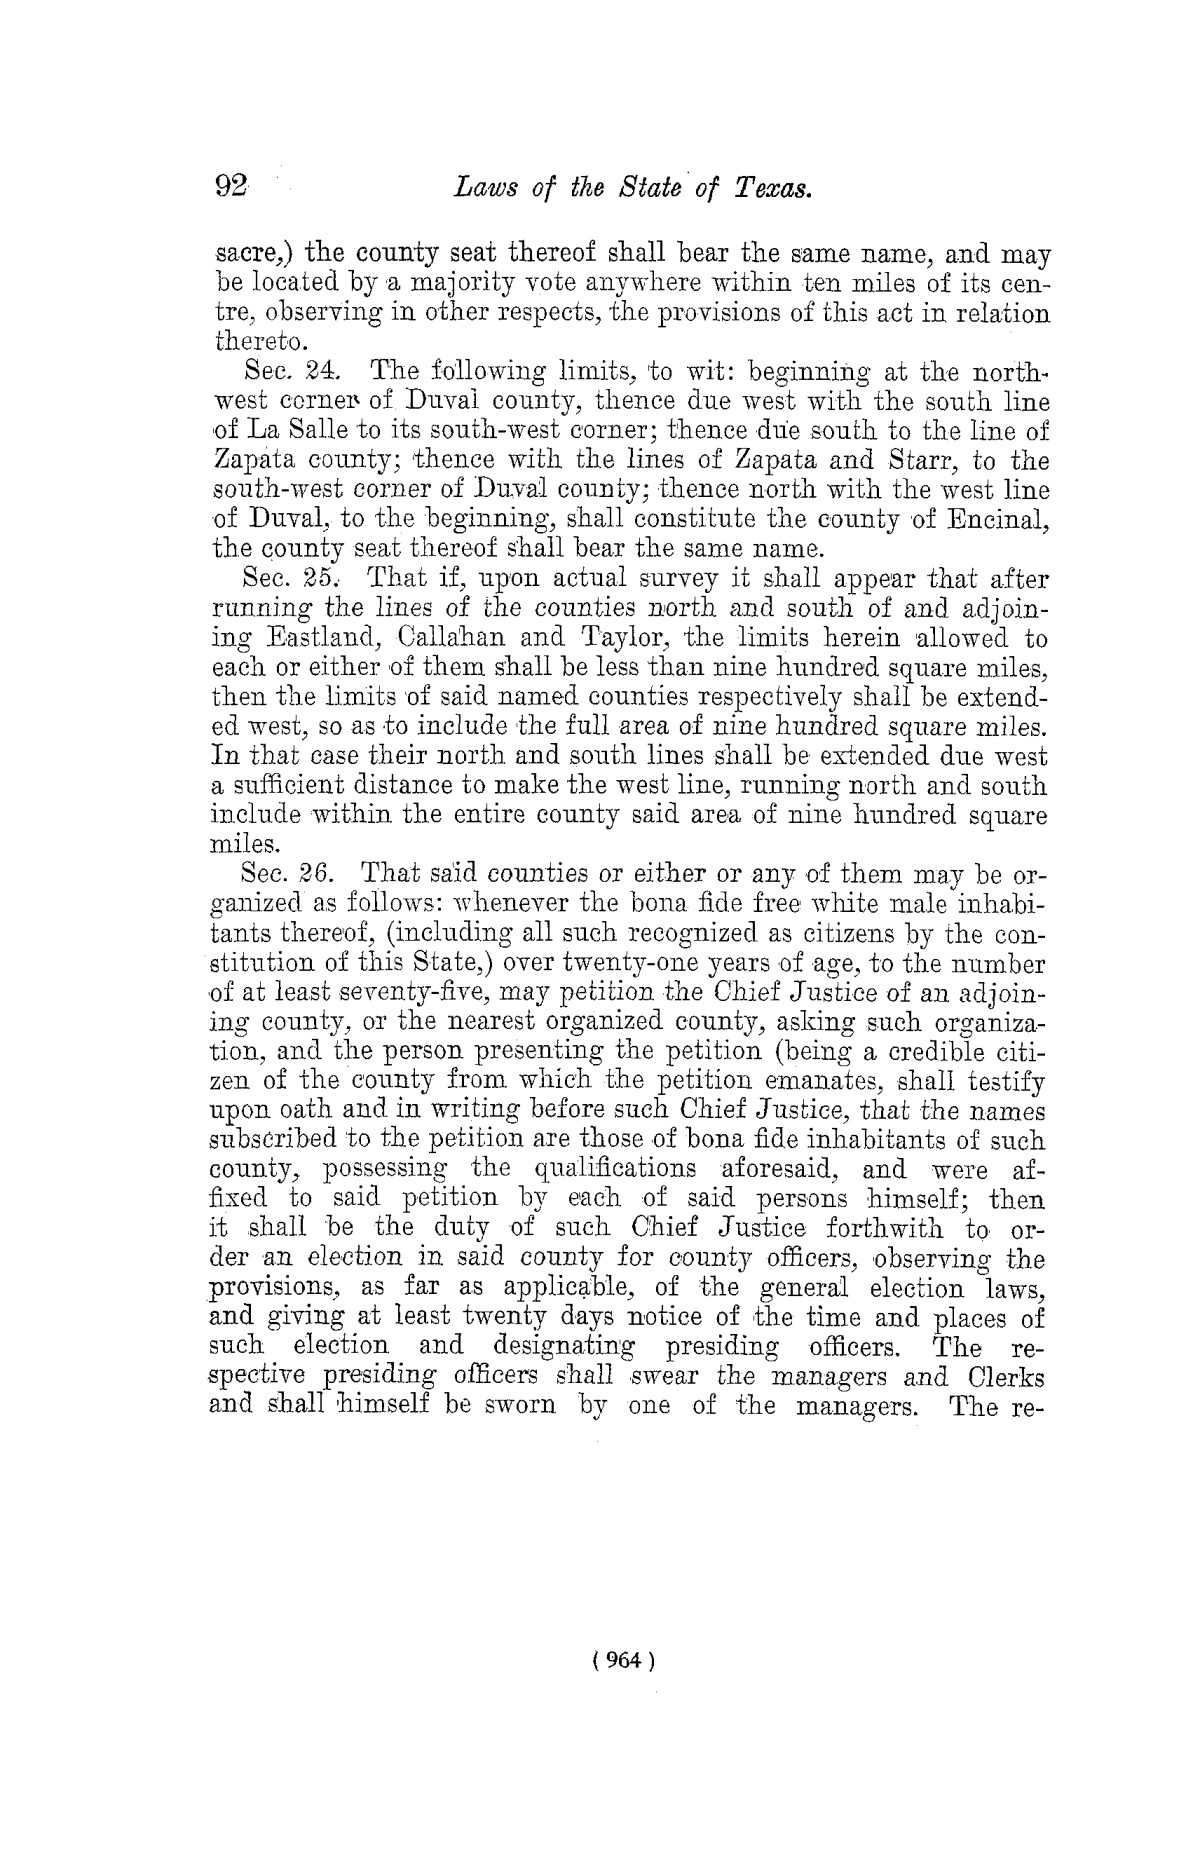 The Laws of Texas, 1822-1897 Volume 4
                                                
                                                    964
                                                